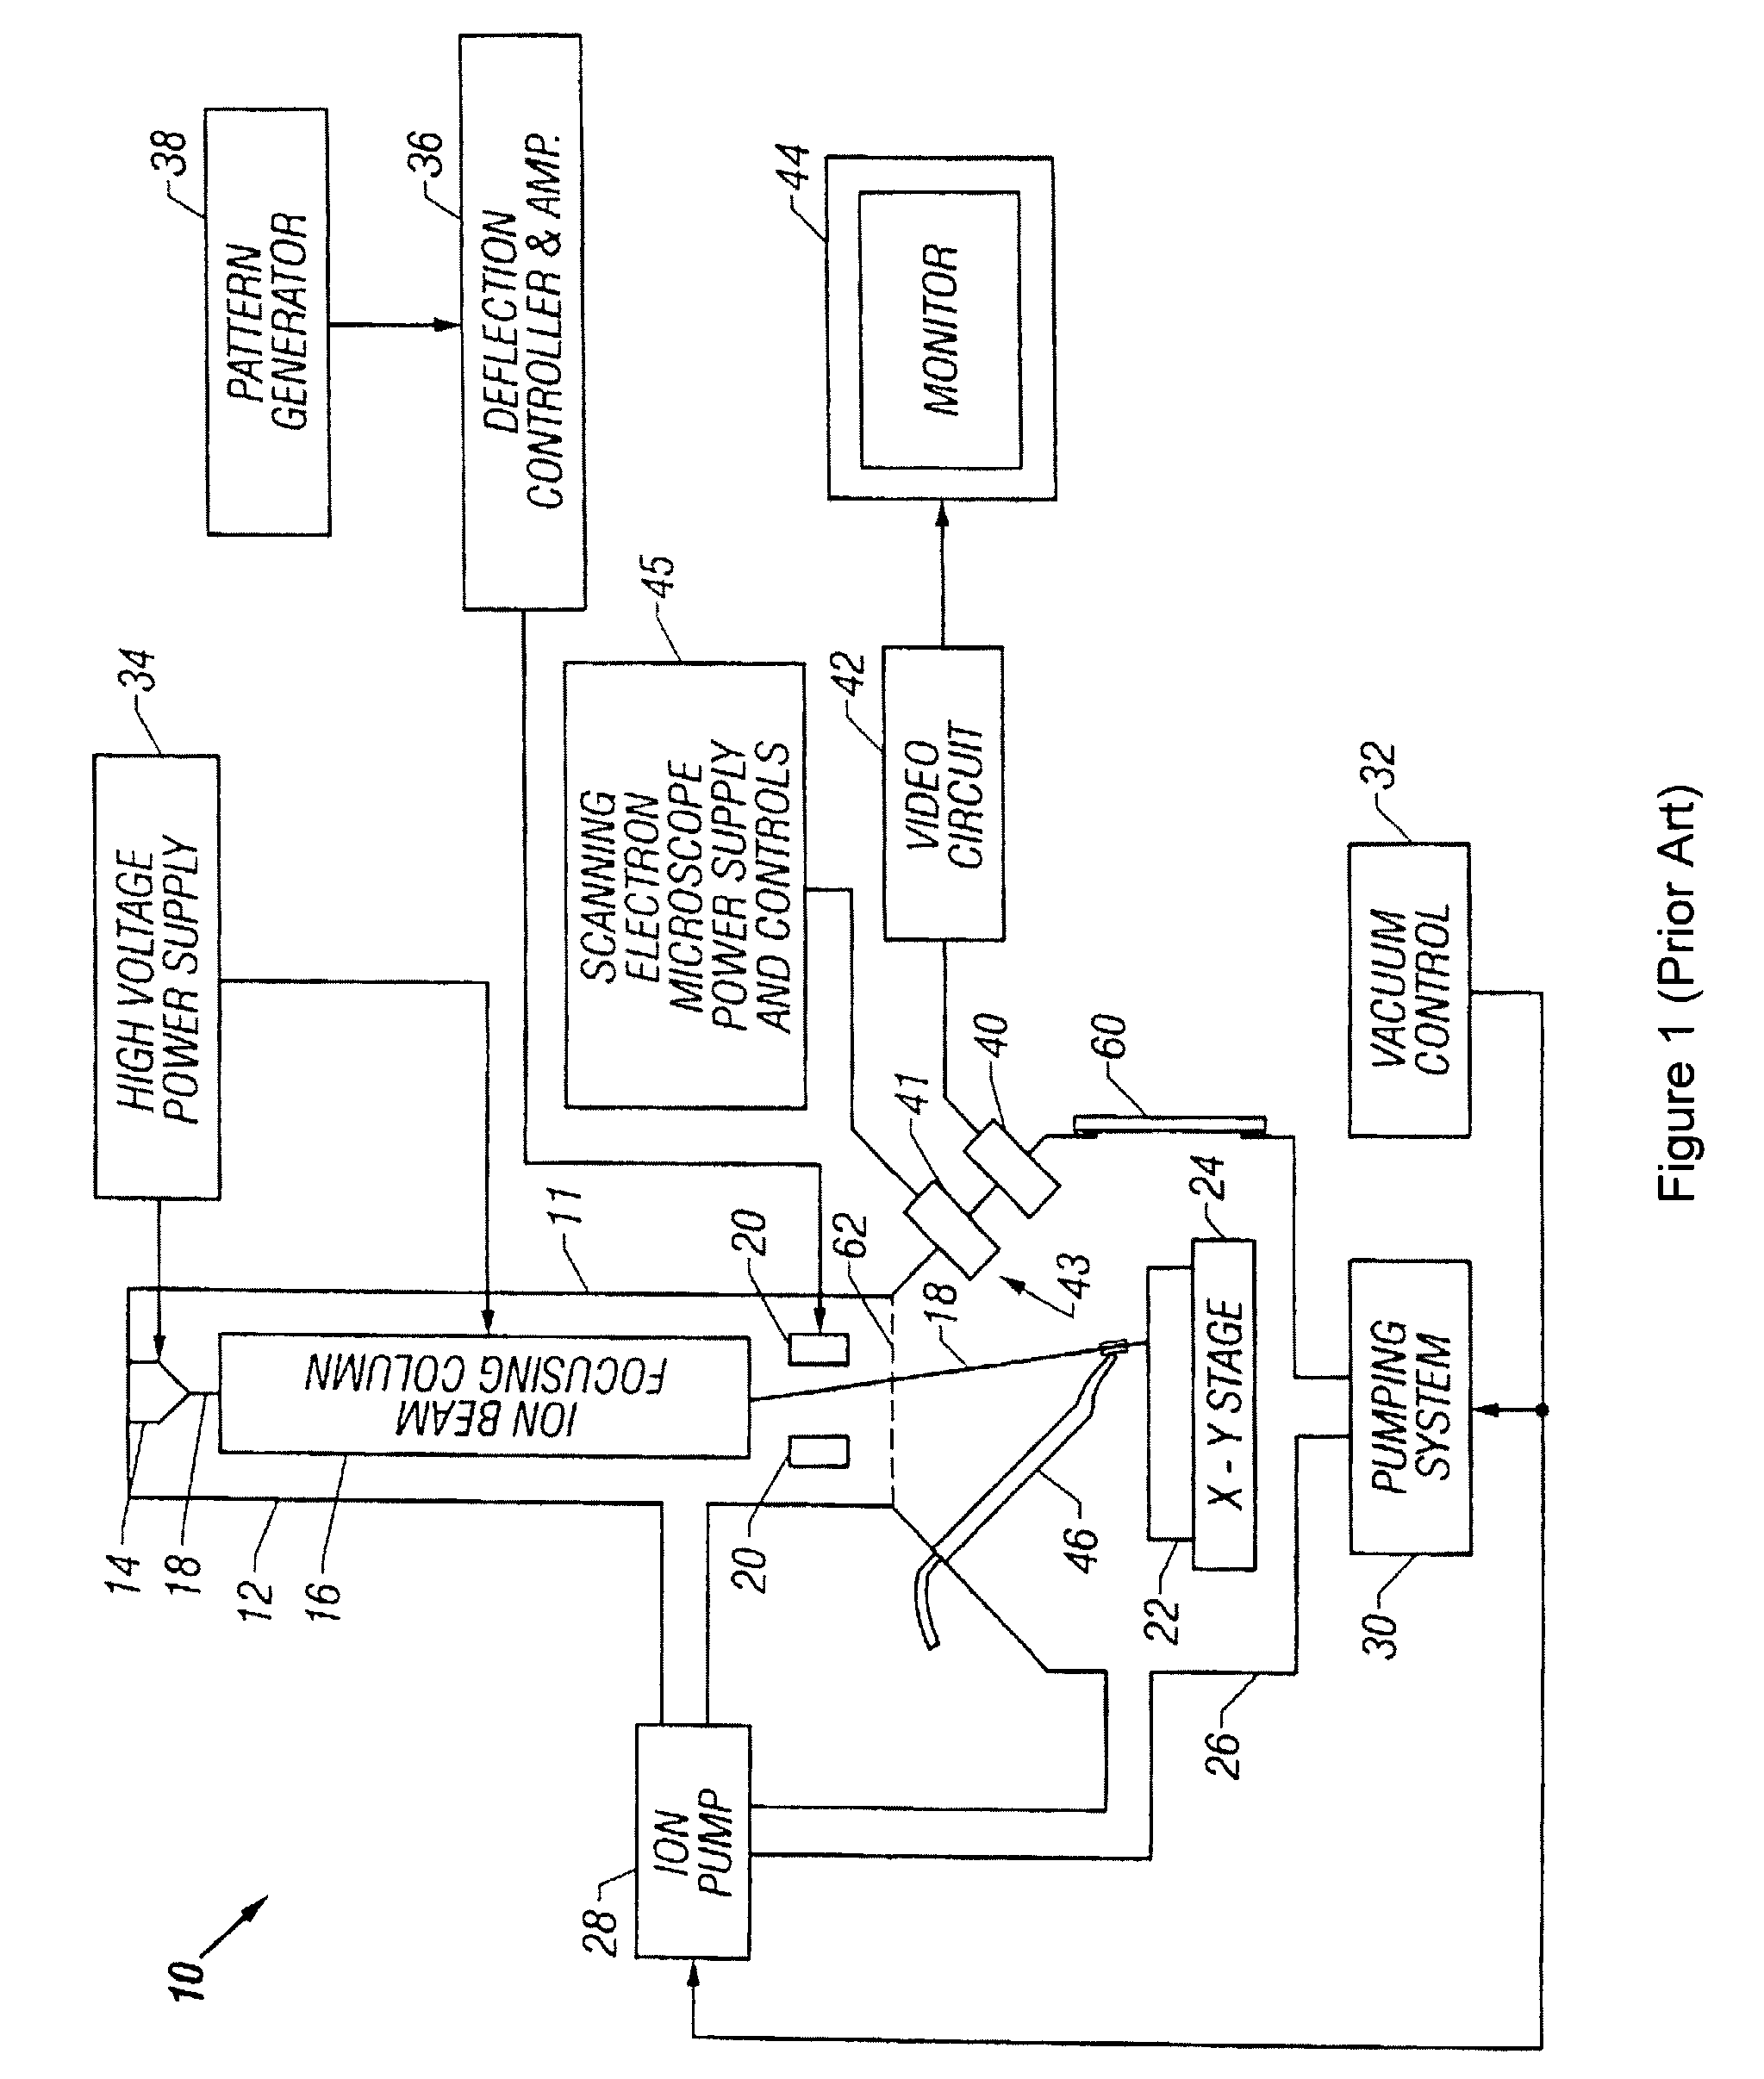 System and Method for Focused Ion Beam Data Analysis